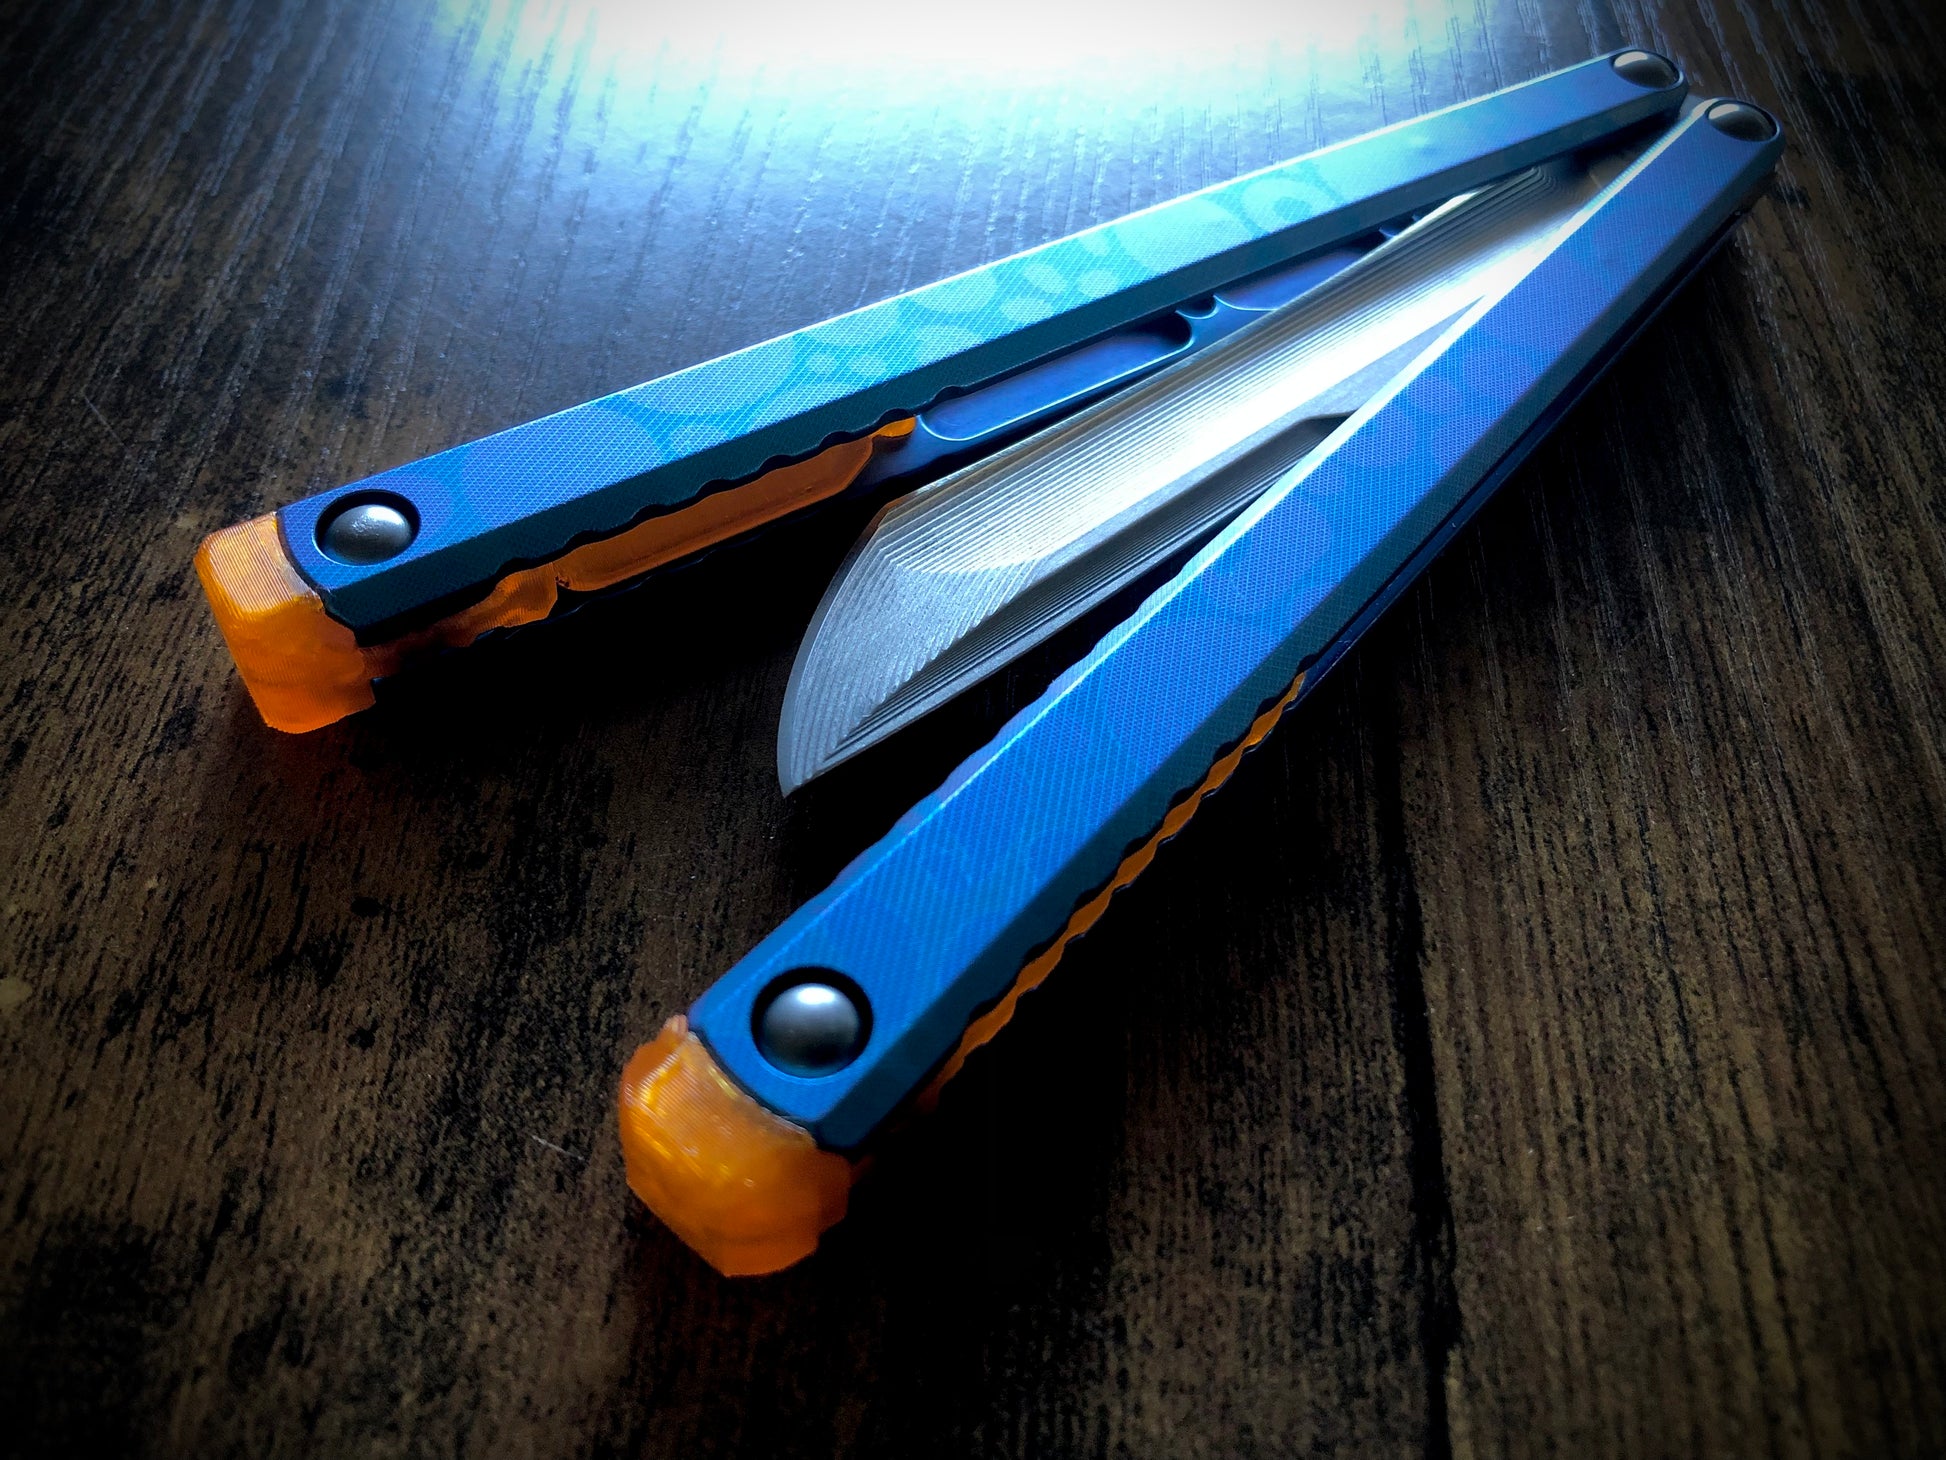 These Zippy spacers designed for the Fellowship Blades Gaboon balisong are made in-house from a rubbery, shatter-proof polyurethane. They add&nbsp;additional&nbsp;jimping to the Gaboon, provide a more neutral balance, and are also available as extensions which add handle length, protect the handles from drops, and include an adjustable tungsten weight system.